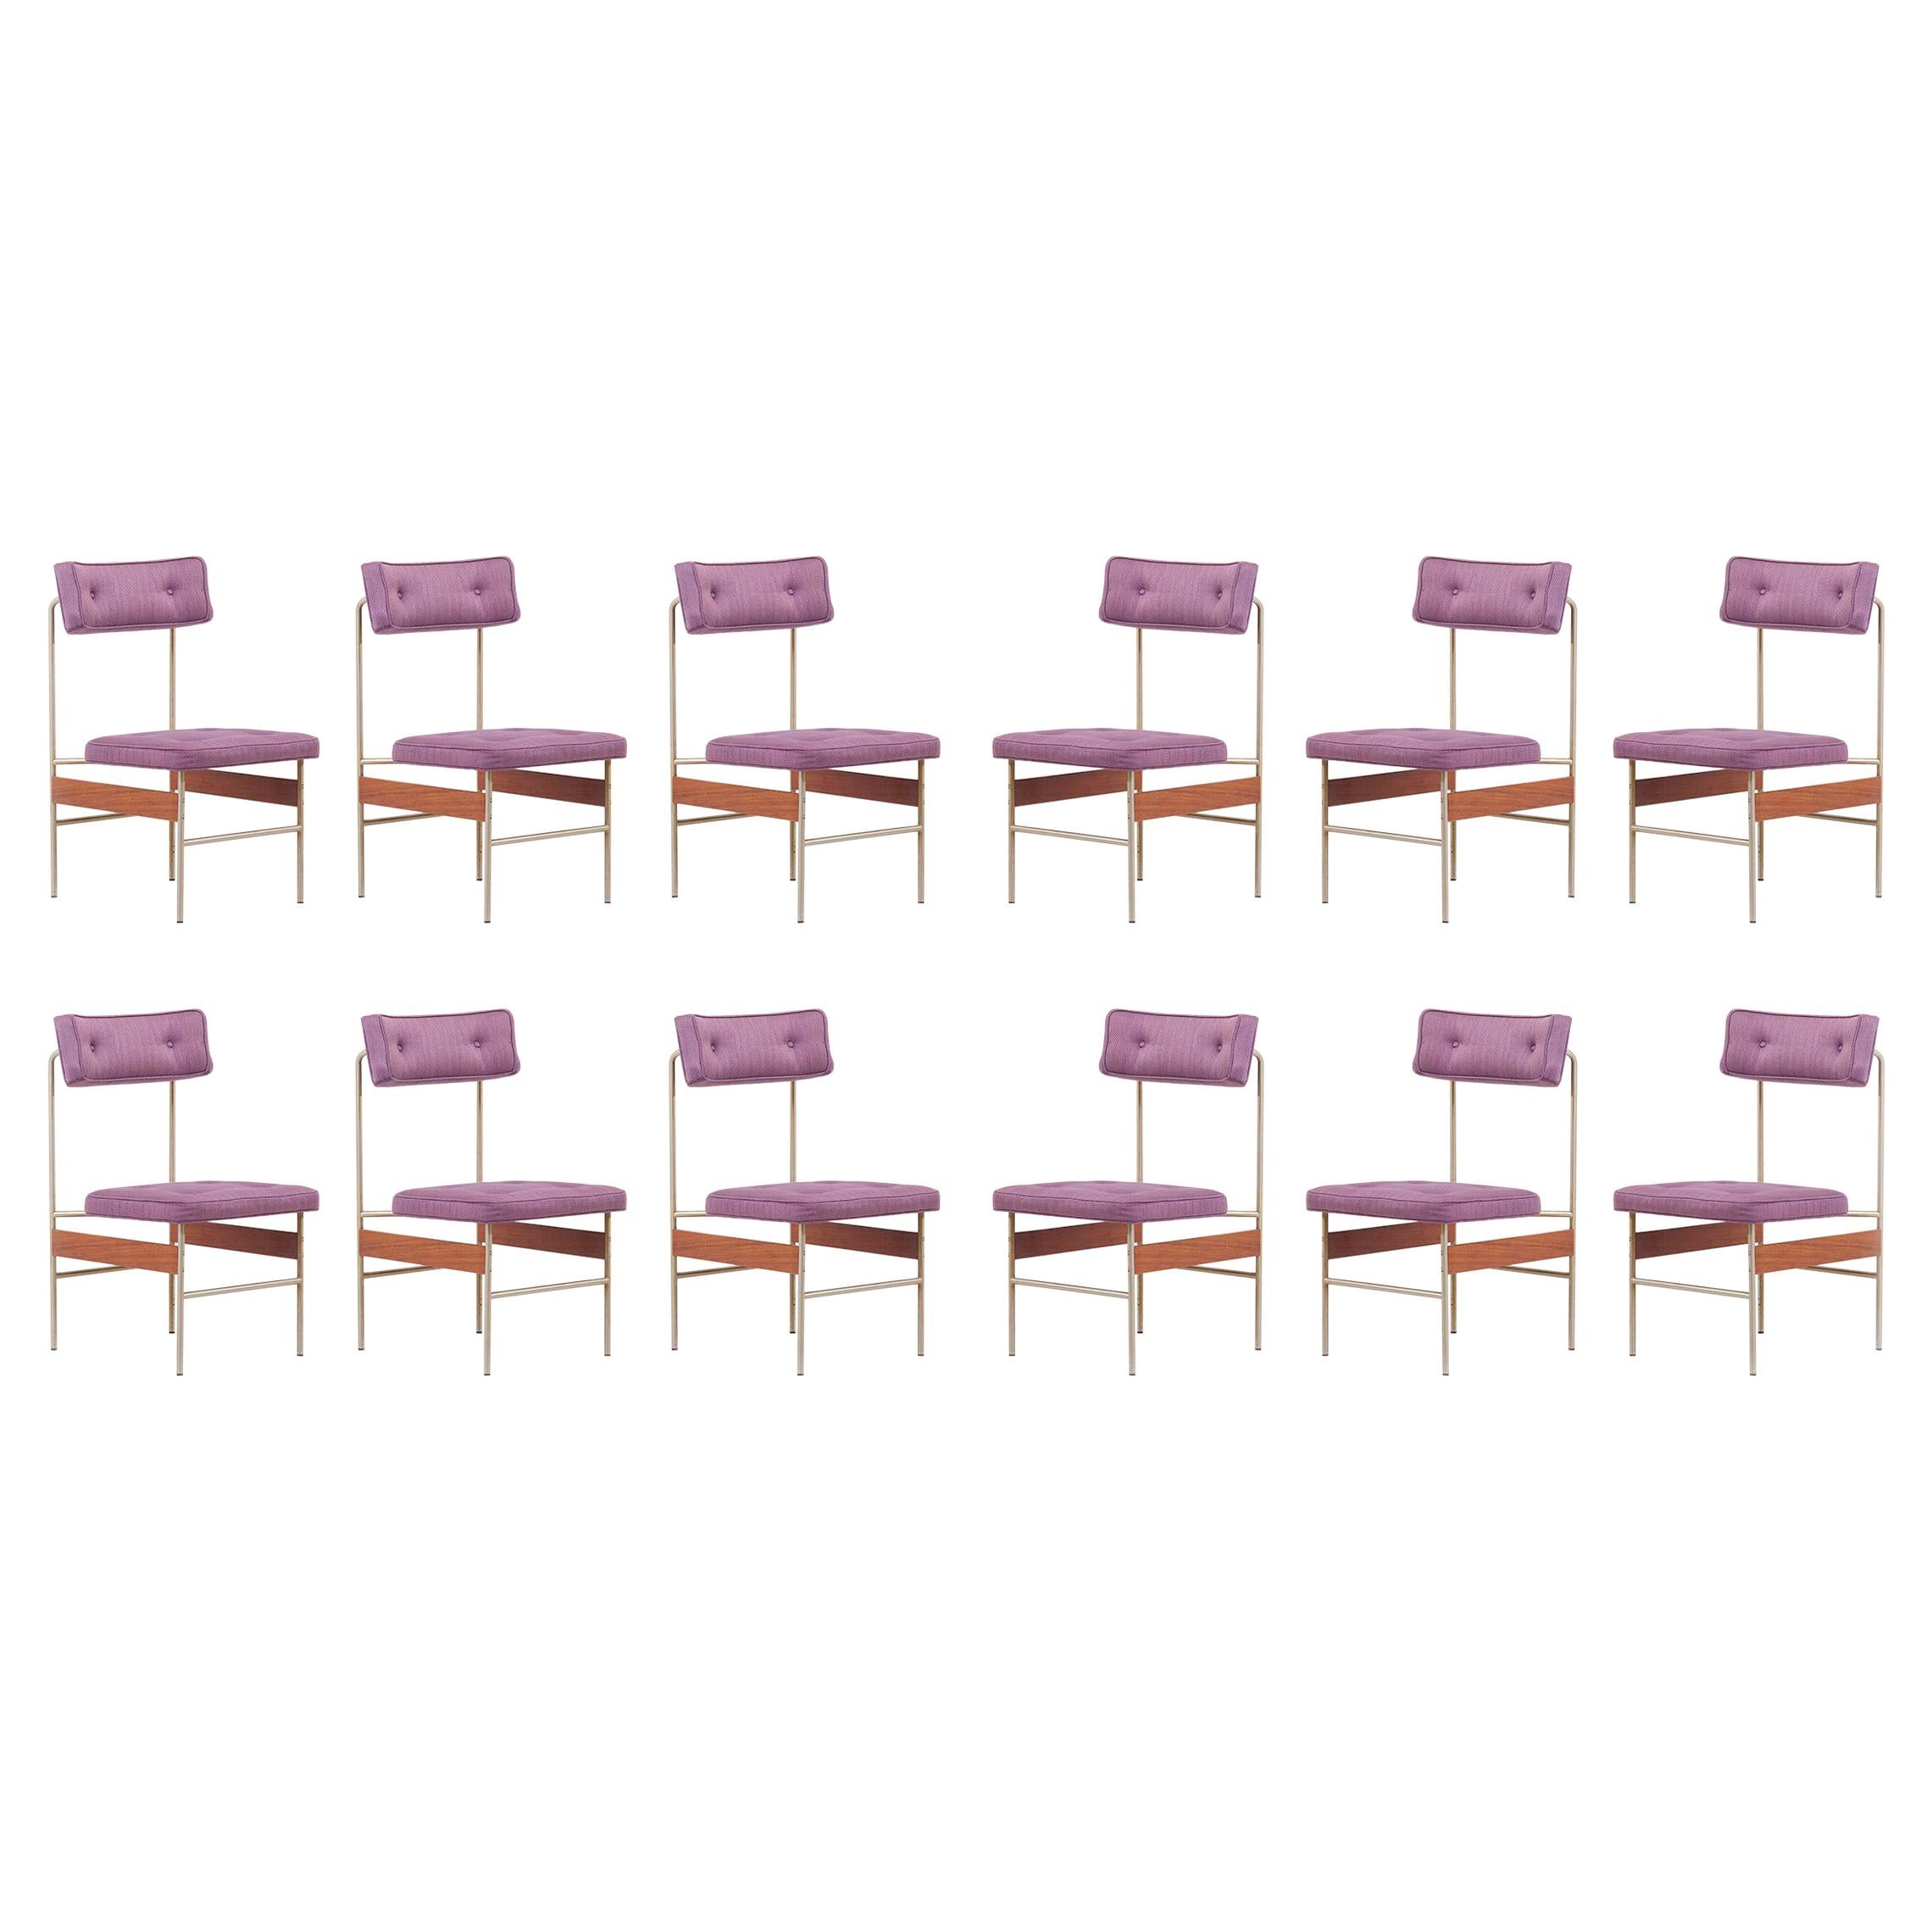 Set of 12 Upholstered Dining Chairs, Italy, 1960s